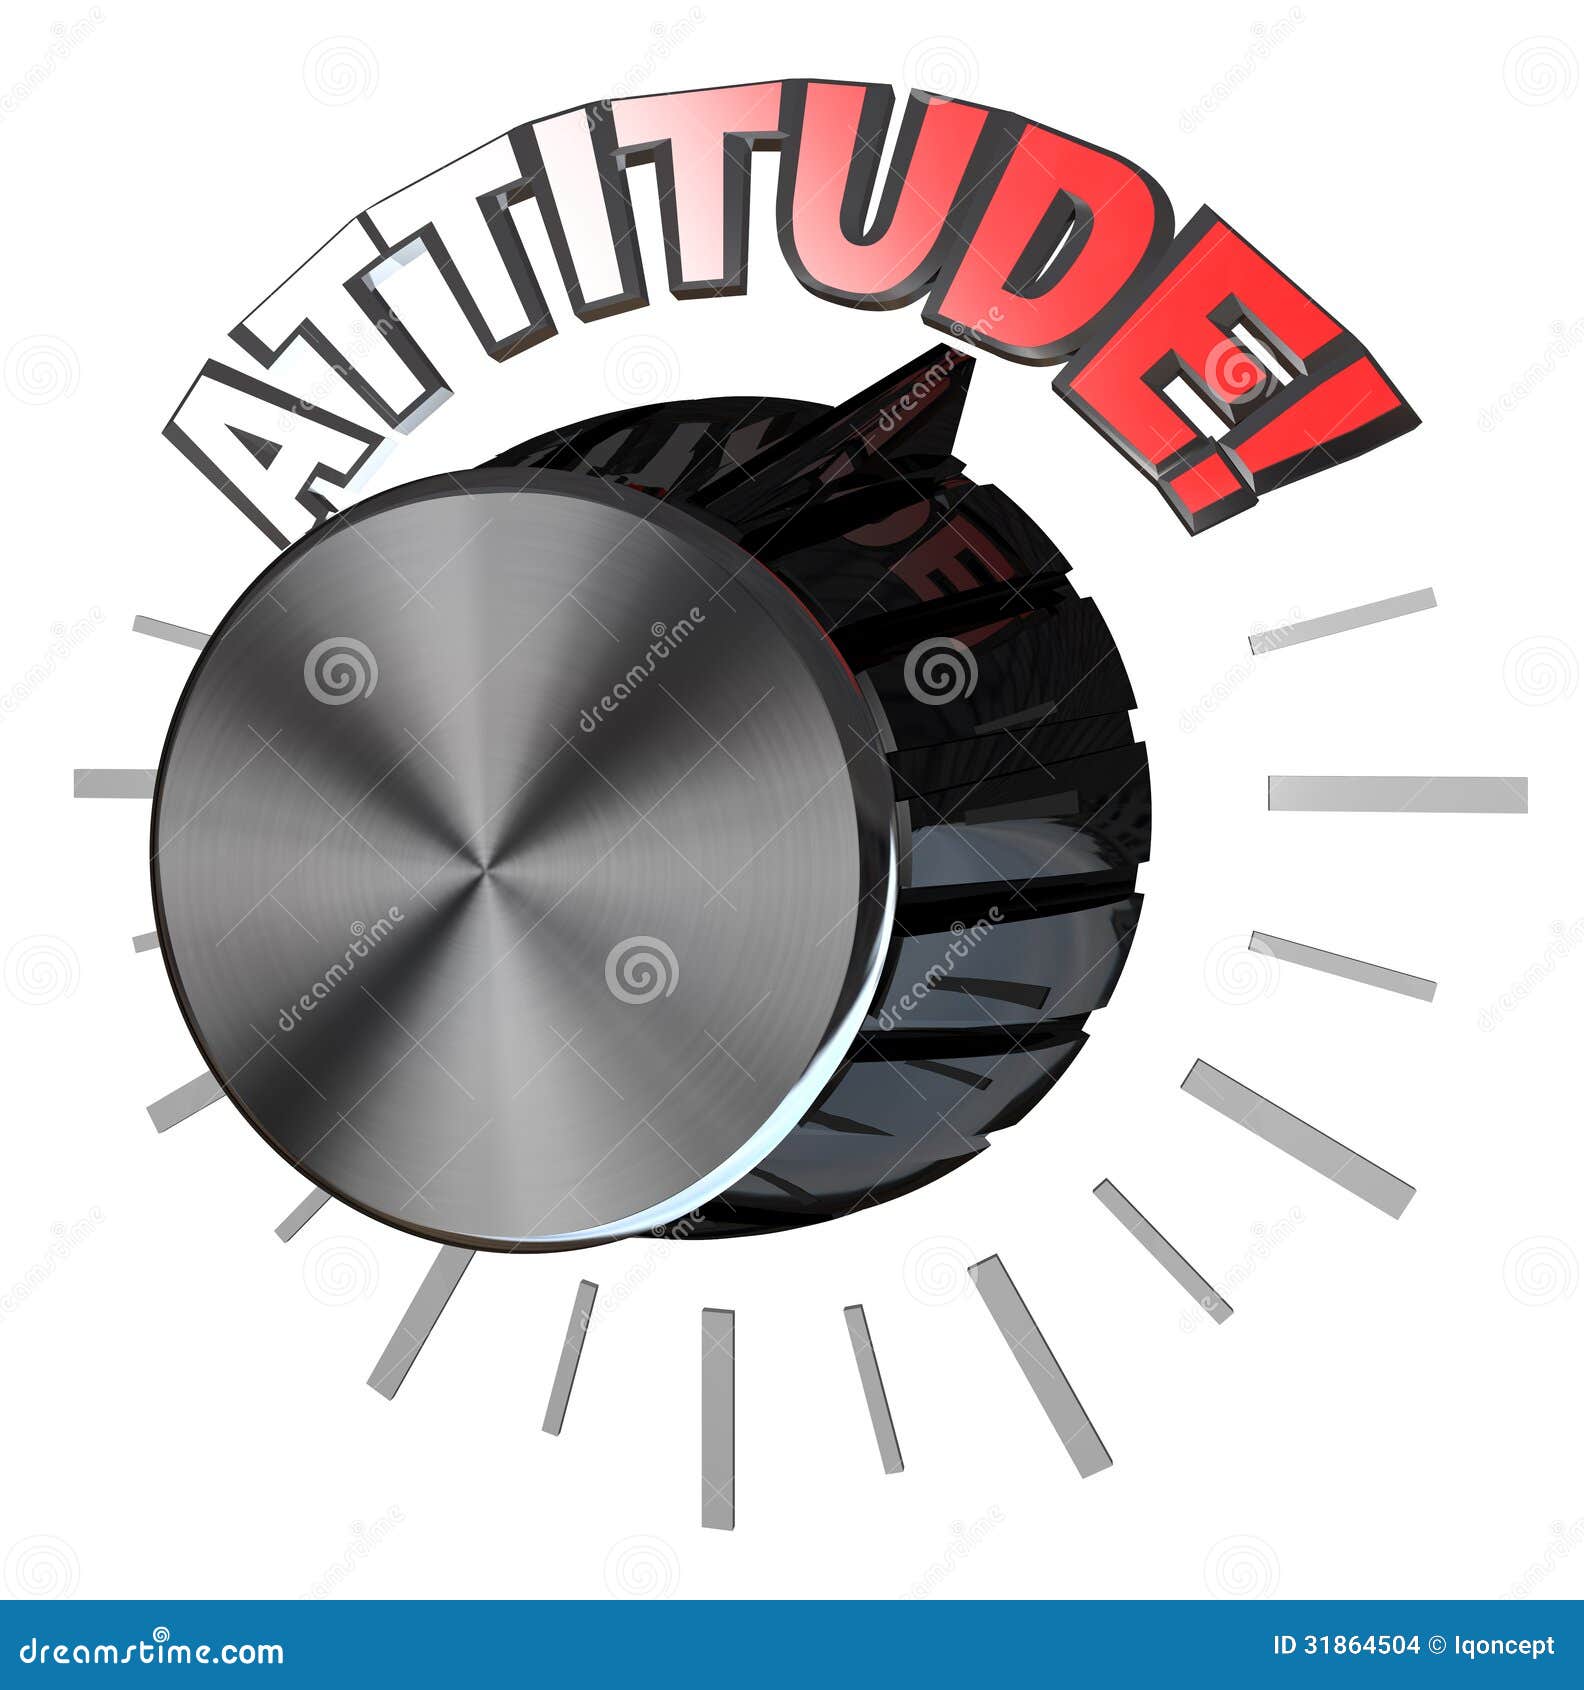 attitude volume knob turned to highest level to succeed